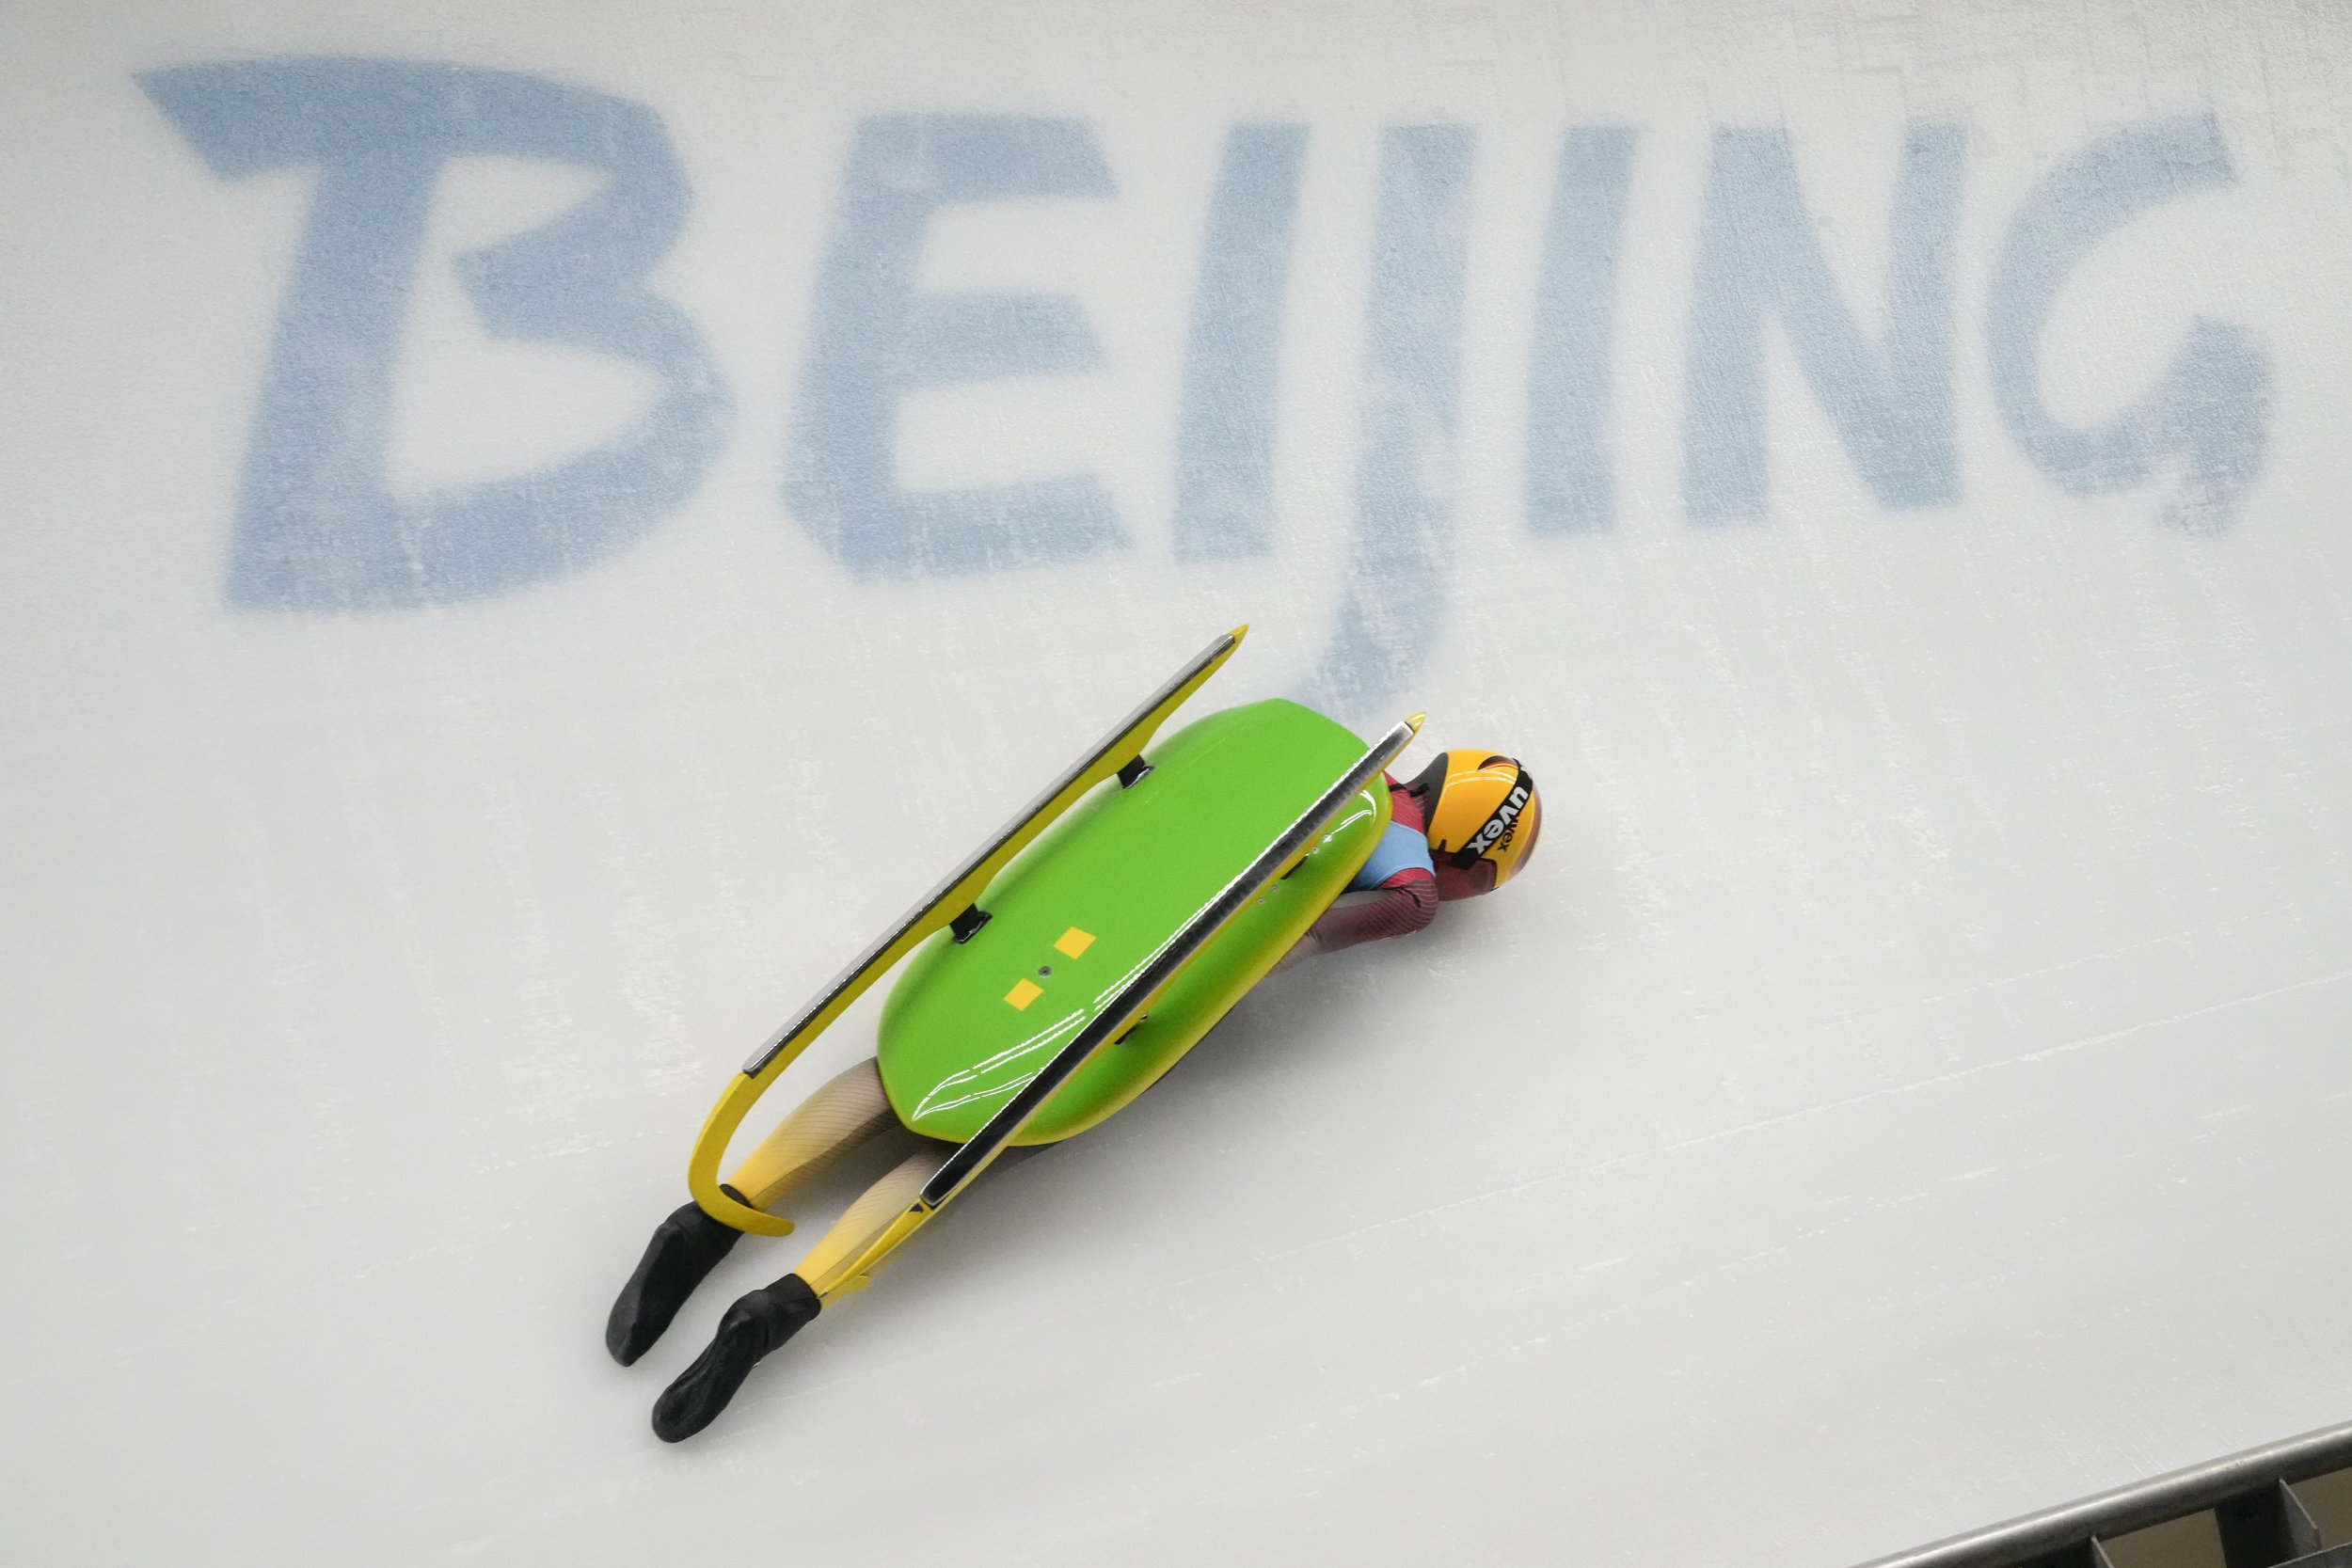  Julia Taubitz, of Germany, crashes during the luge women's singles run 2 at the 2022 Winter Olympics, Monday, Feb. 7, 2022, in the Yanqing district of Beijing. (AP Photo/Dmitri Lovetsky) 